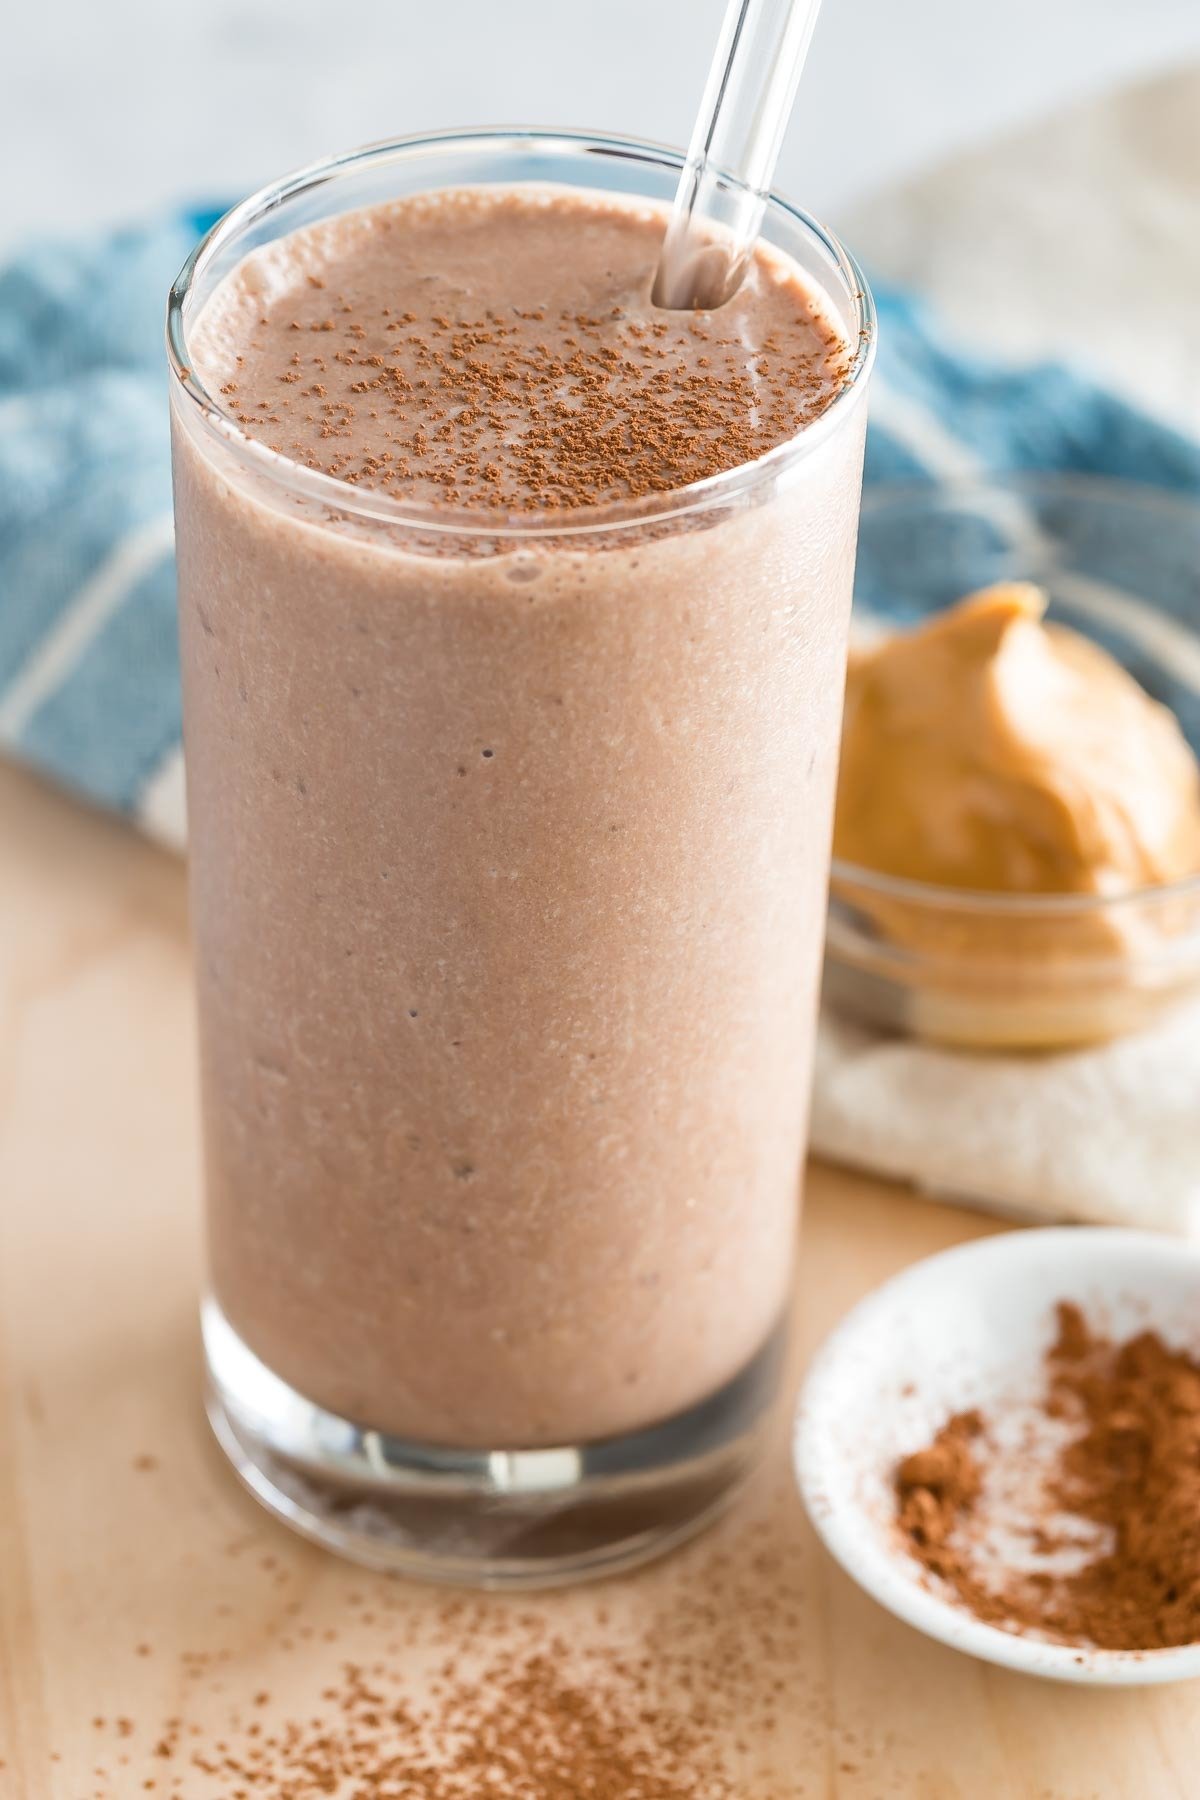 Chocolate Peanut Butter Smoothie from weelicious.com